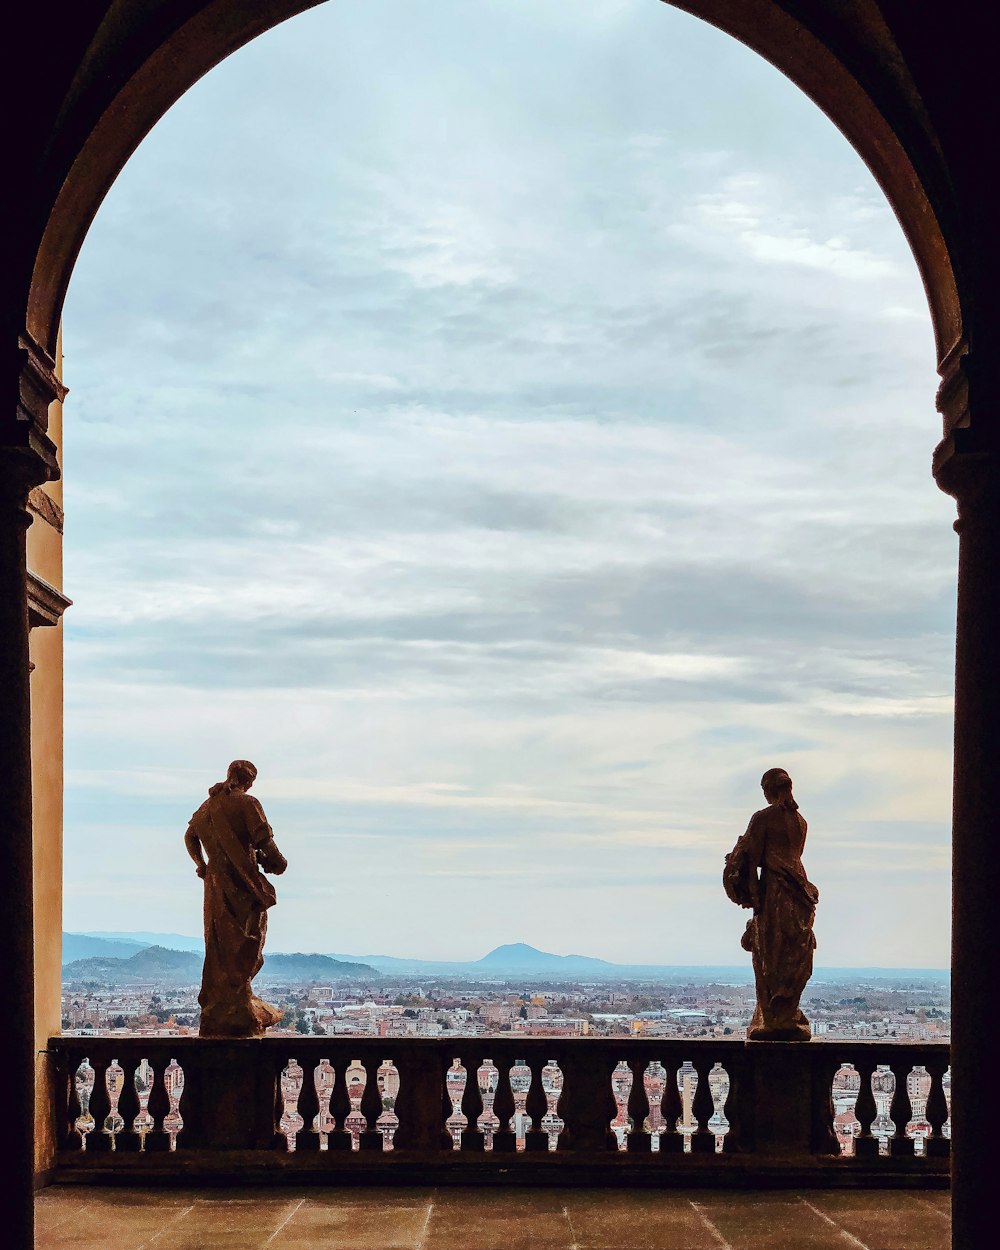 two statues on balcony railing during day